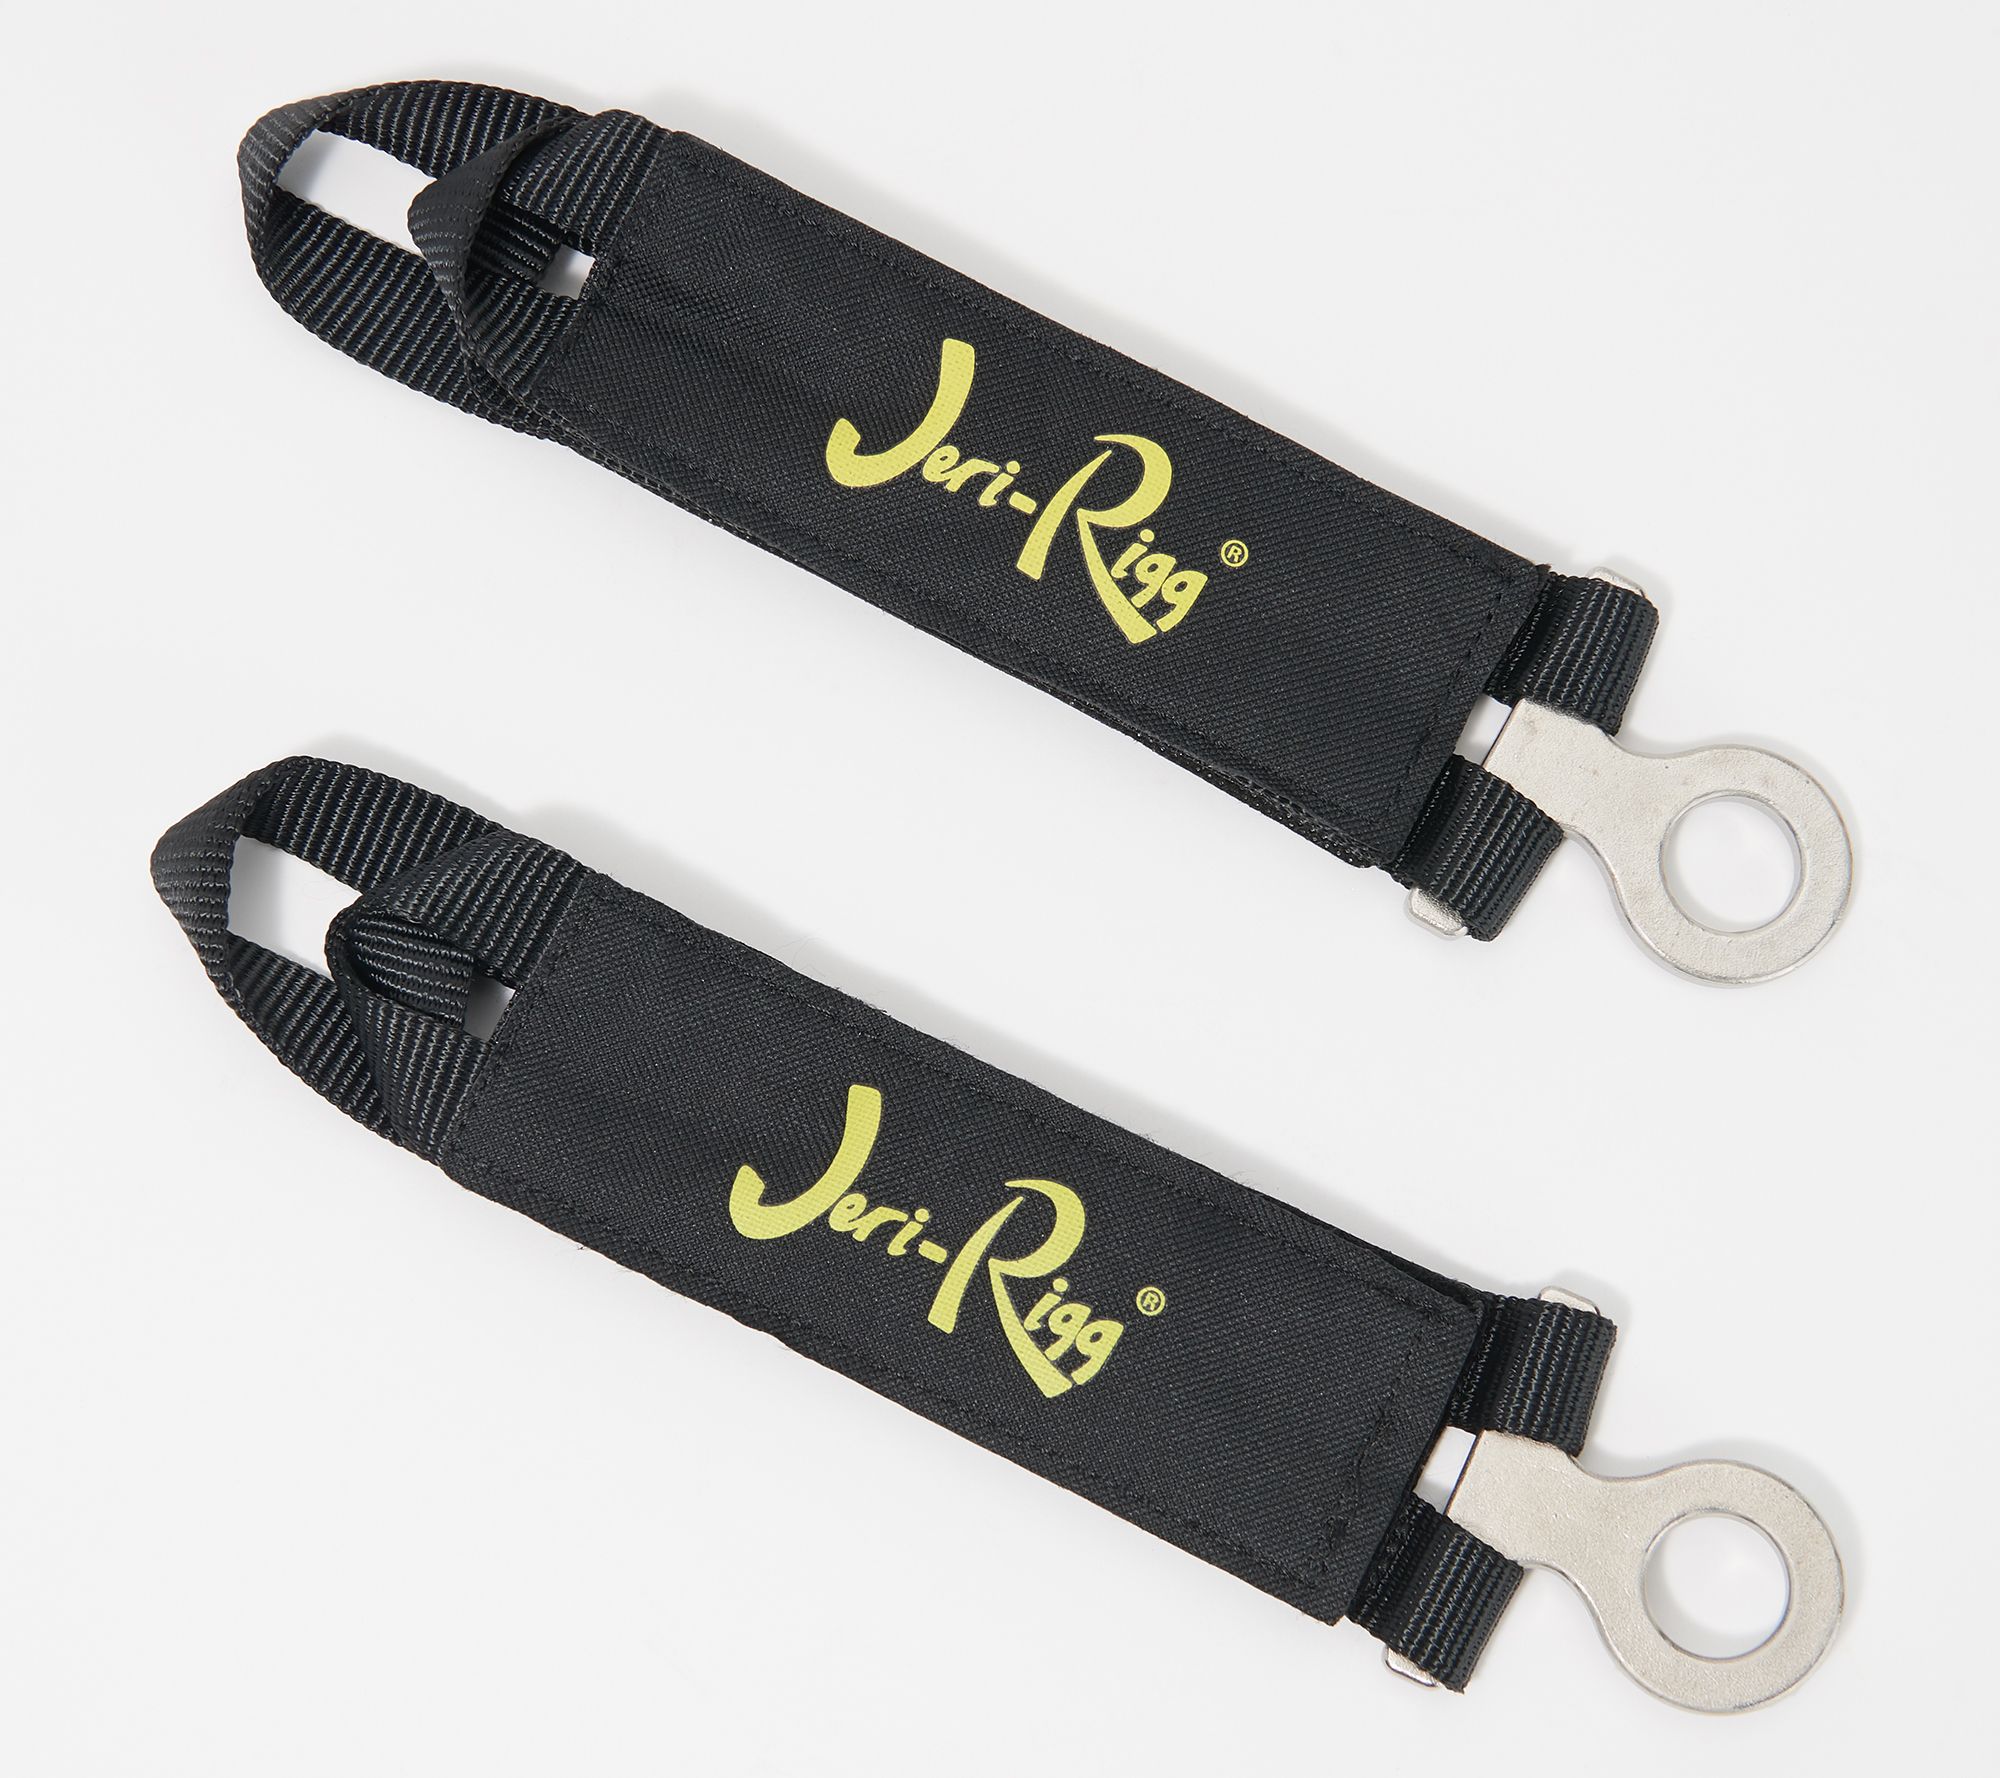 heavy duty material JERI-RIGG EYE LOOP TIE DOWN,SMALL MEDIUM 1,330 lbs and breaking strength Connect your wratchet strap to it and secure! 4,000 lbs working load 2-PACK Tie down accessories 